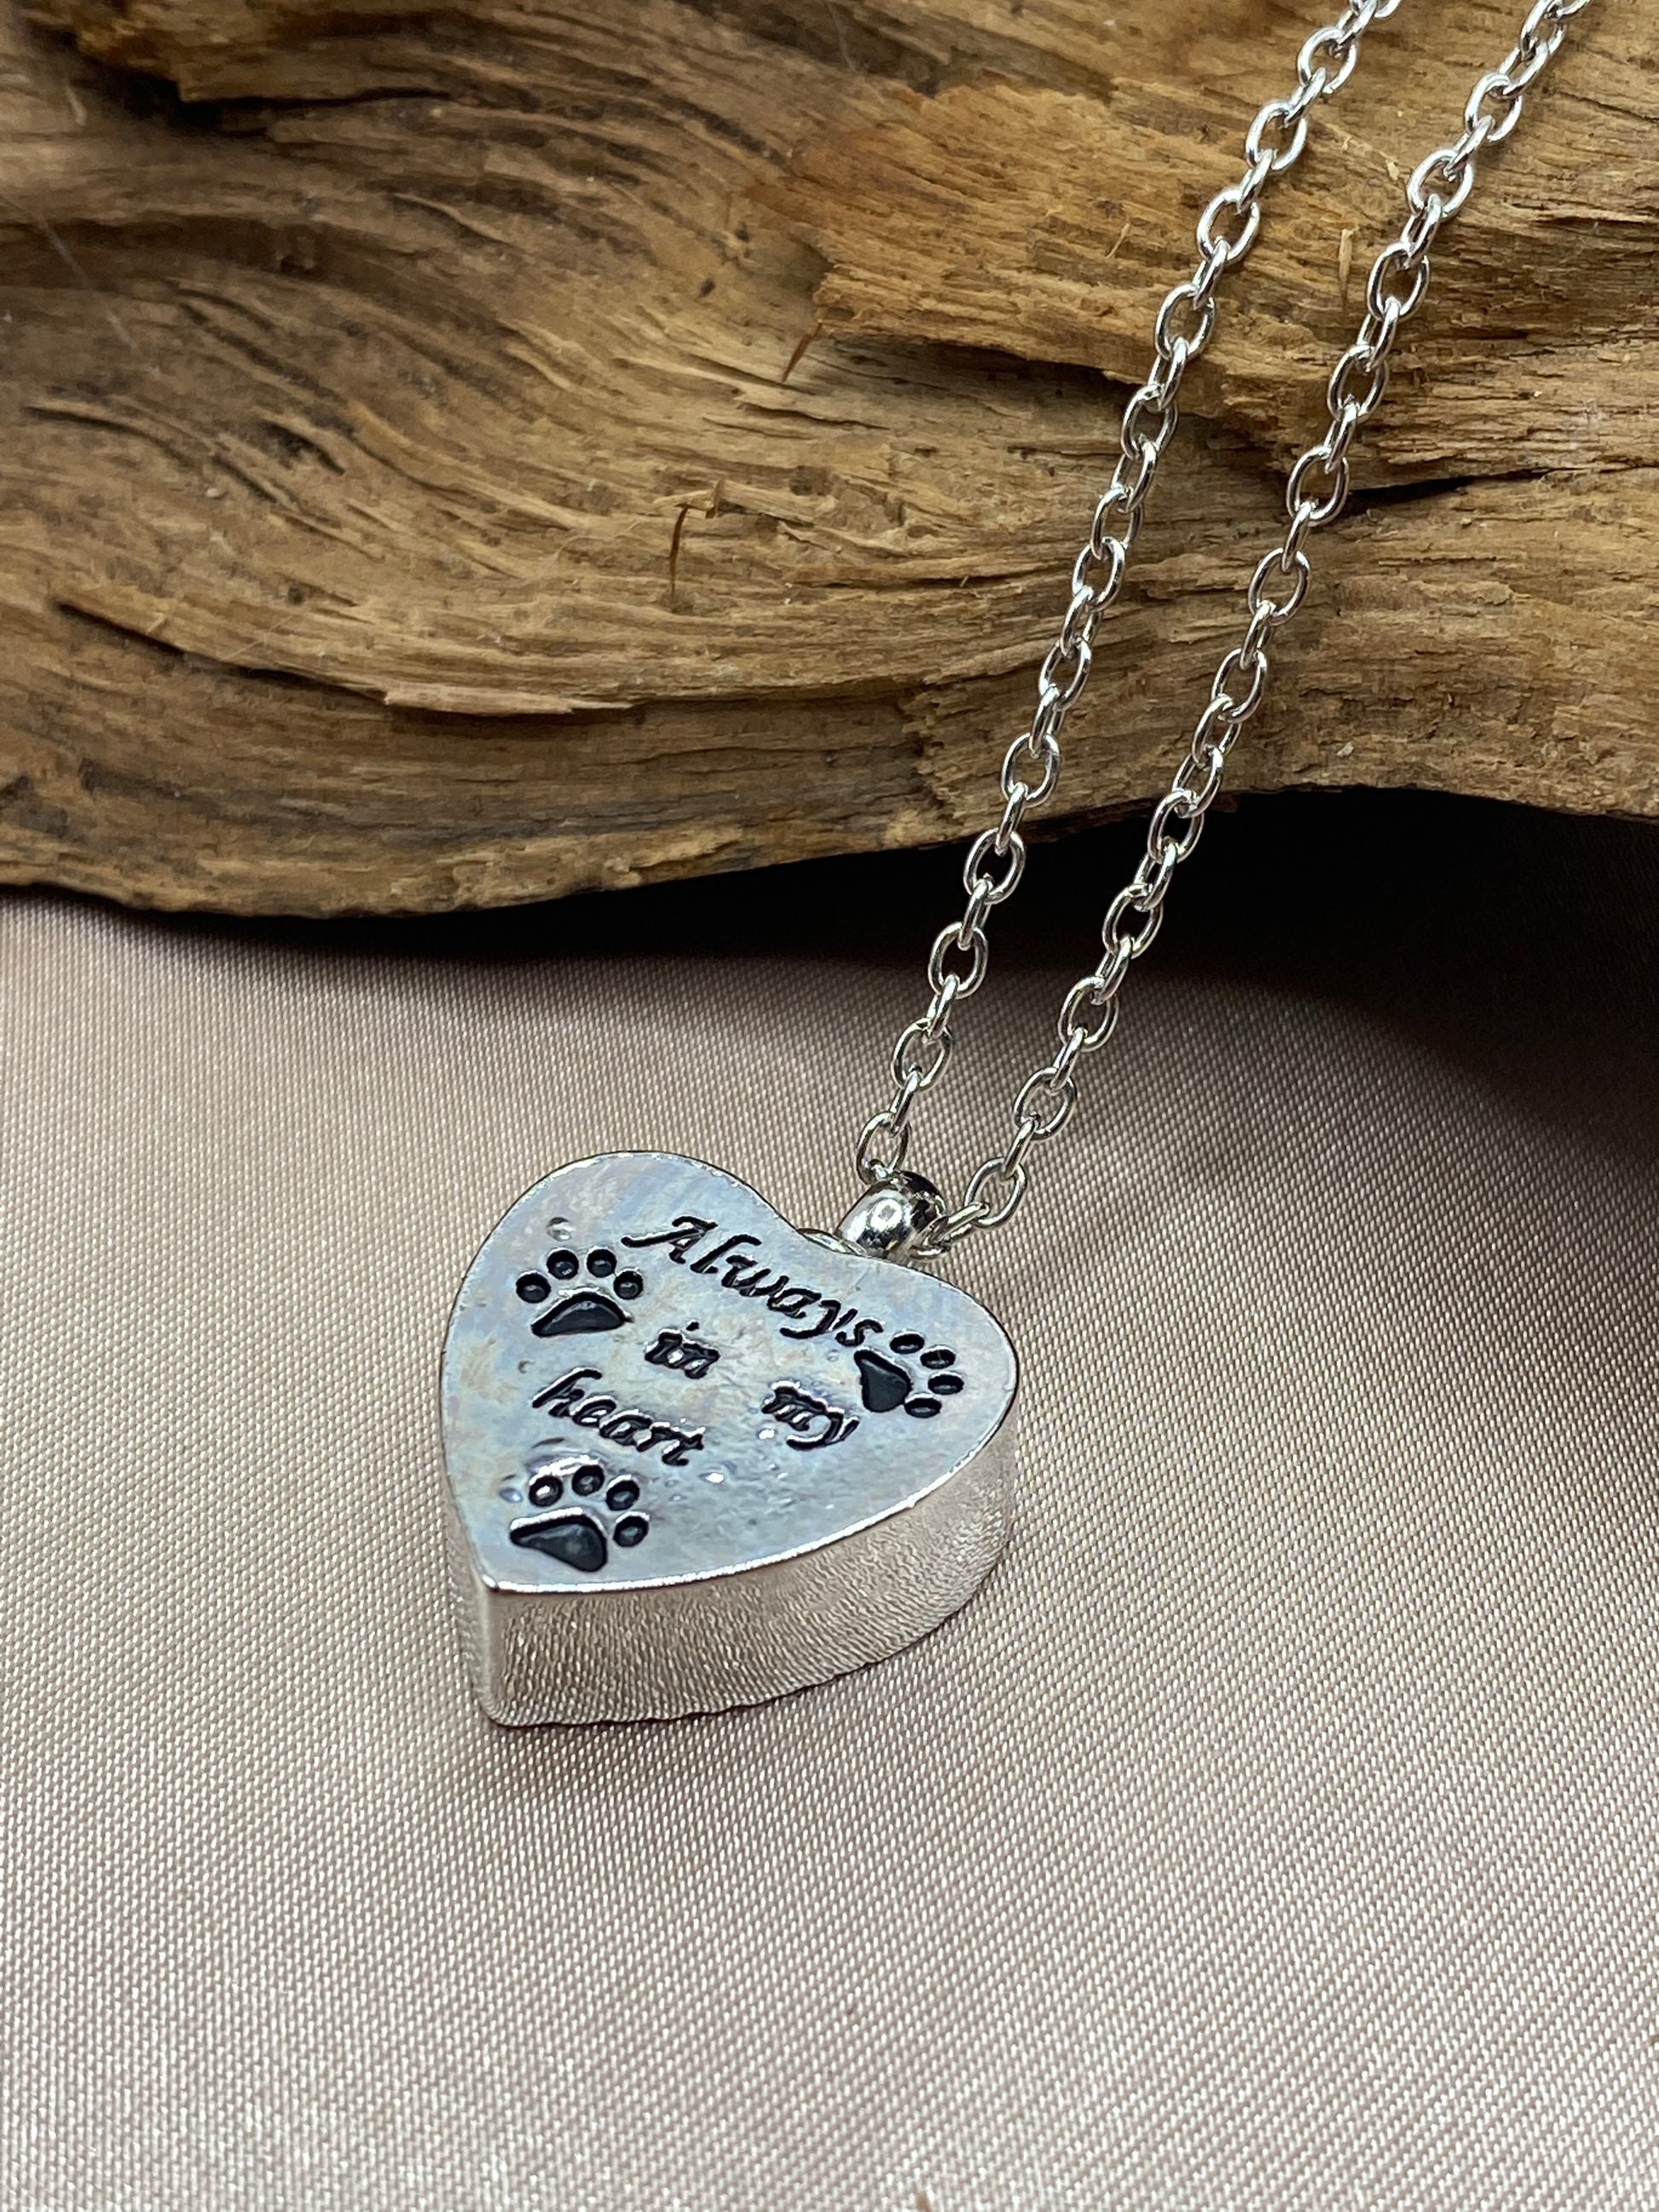 Heart Dog Tag Cremation Jewelry Pendant and Necklace for Ashes